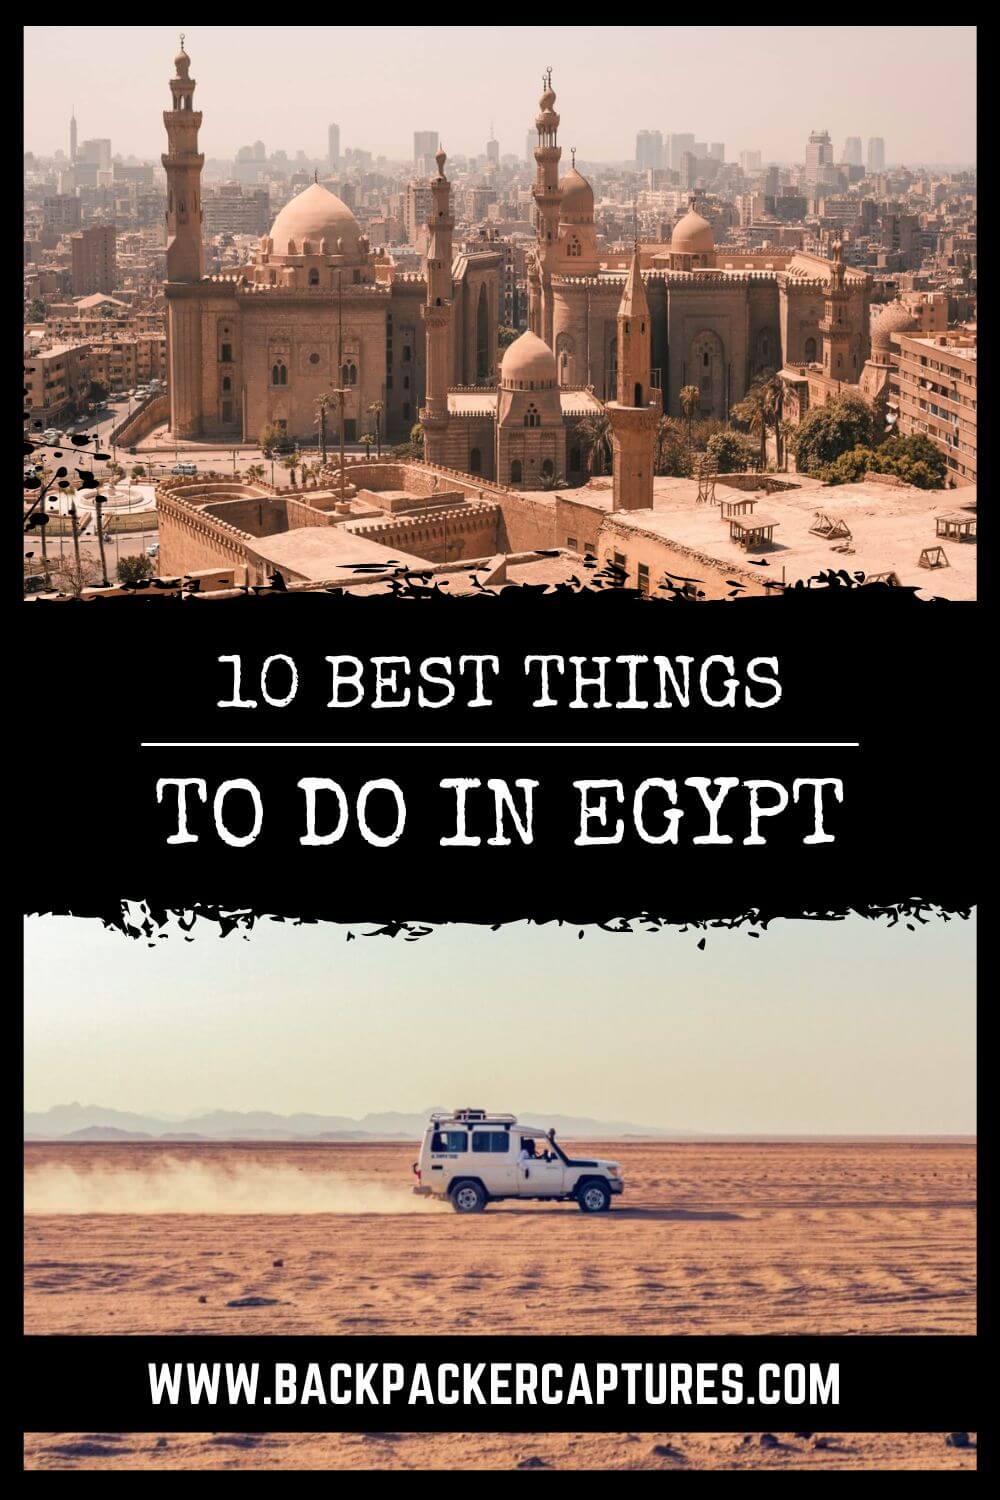 10 Best Things to Do in Egypt